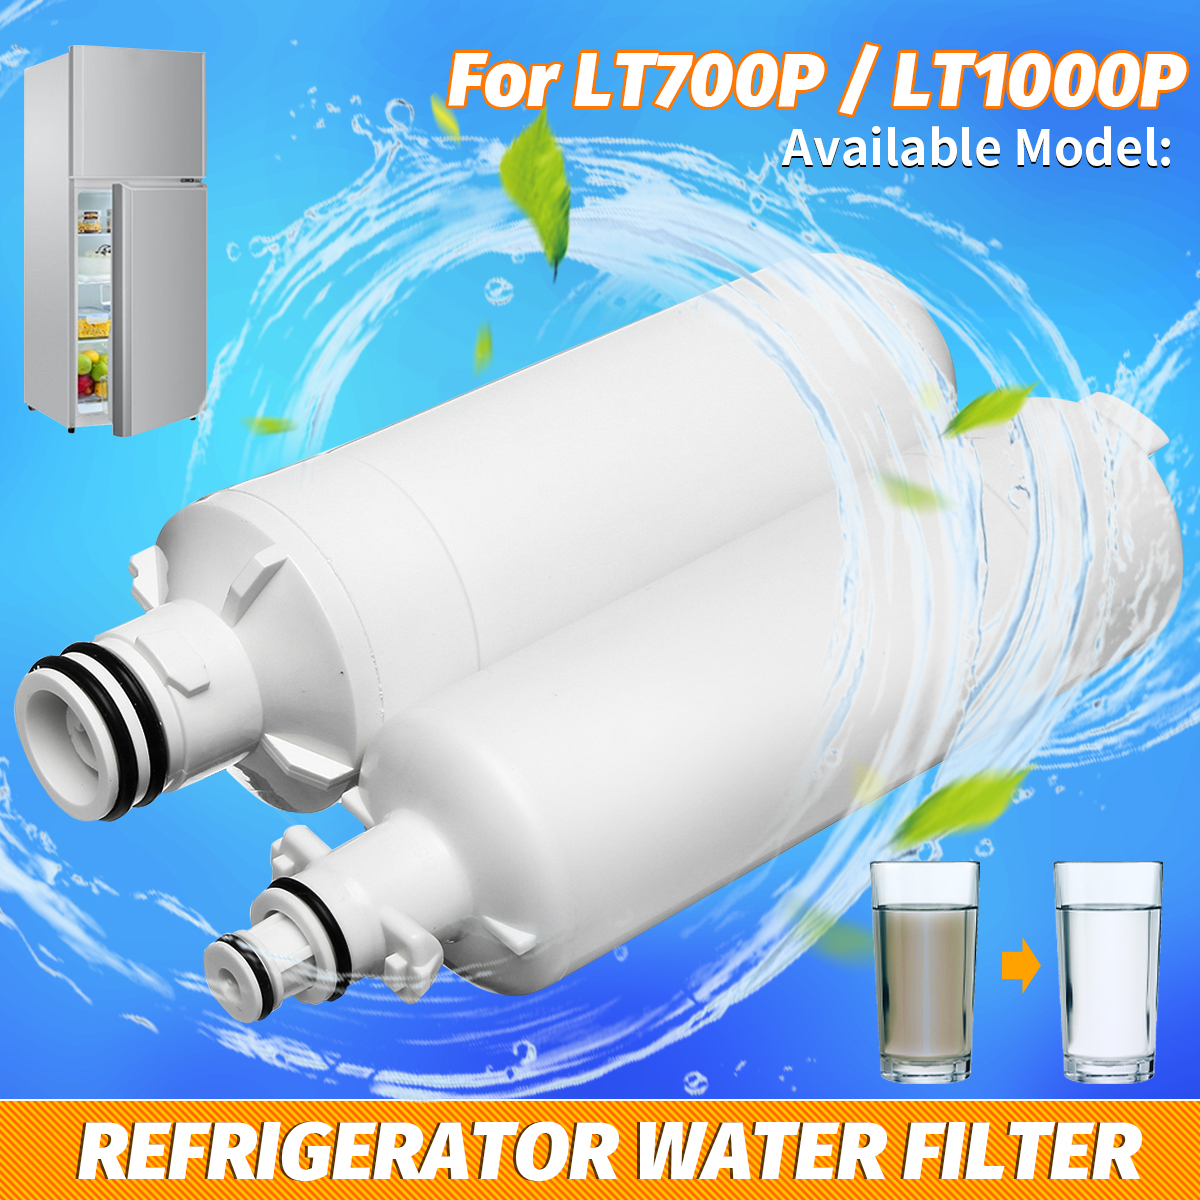 Refrigerator-Water-Filter-Replacement-Cartridge-for--LG-LT700P-LT1000P-1540596-3